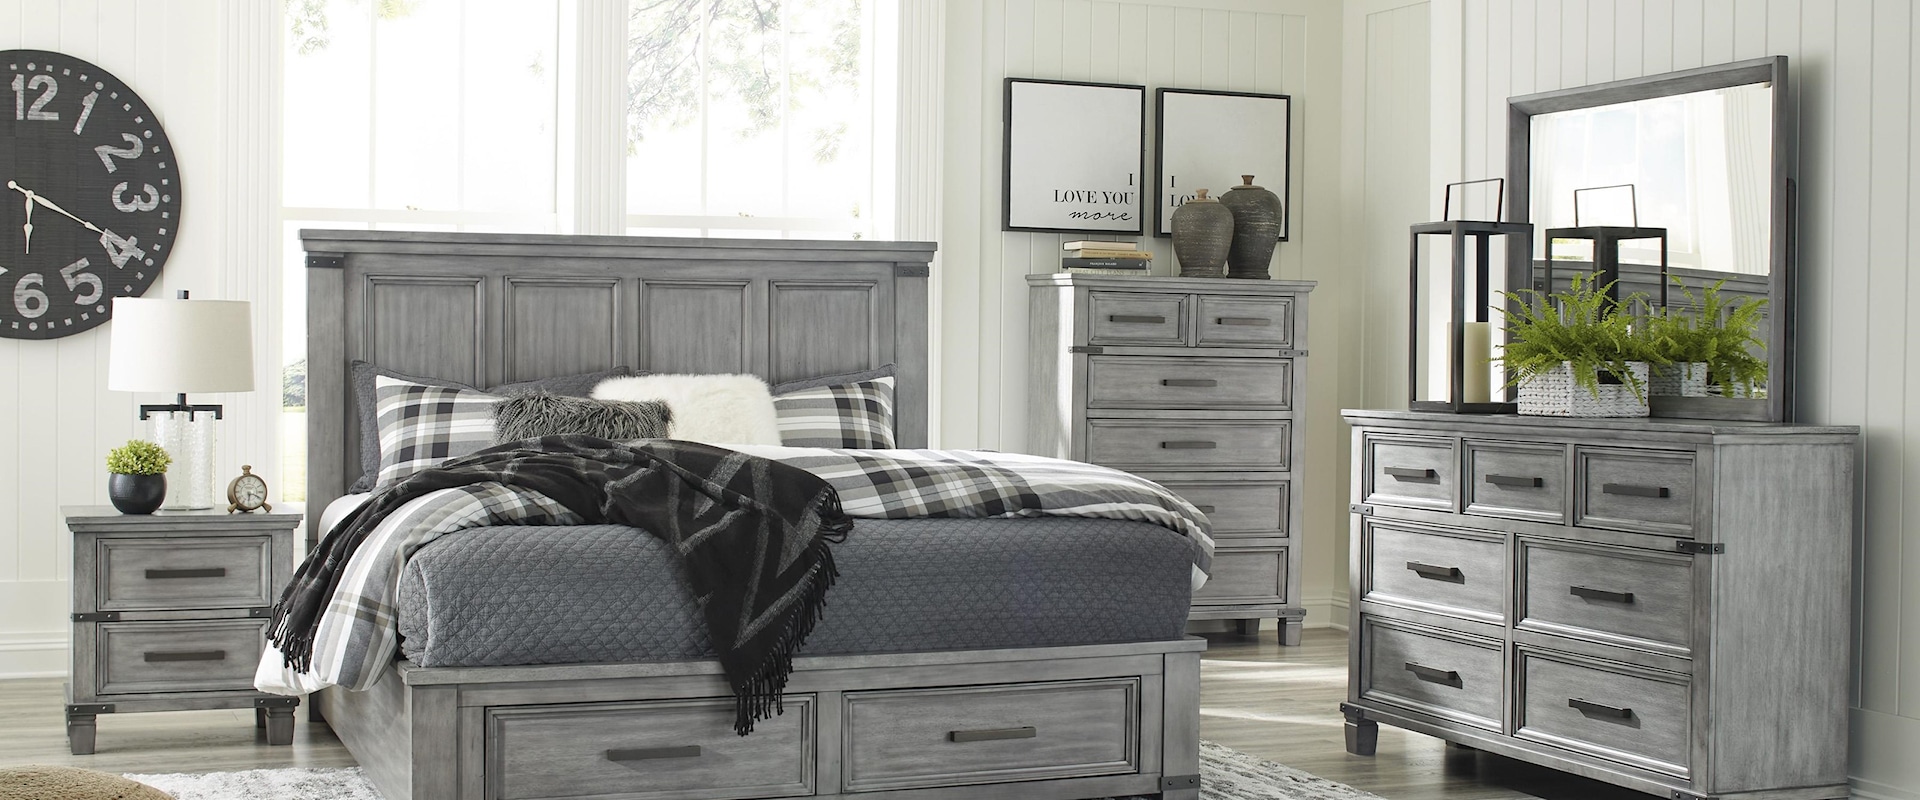 3 Piece Queen Panel Bed with Footboard Storage, 7 Drawer Dresser, and 2 Drawer Nightstand Set